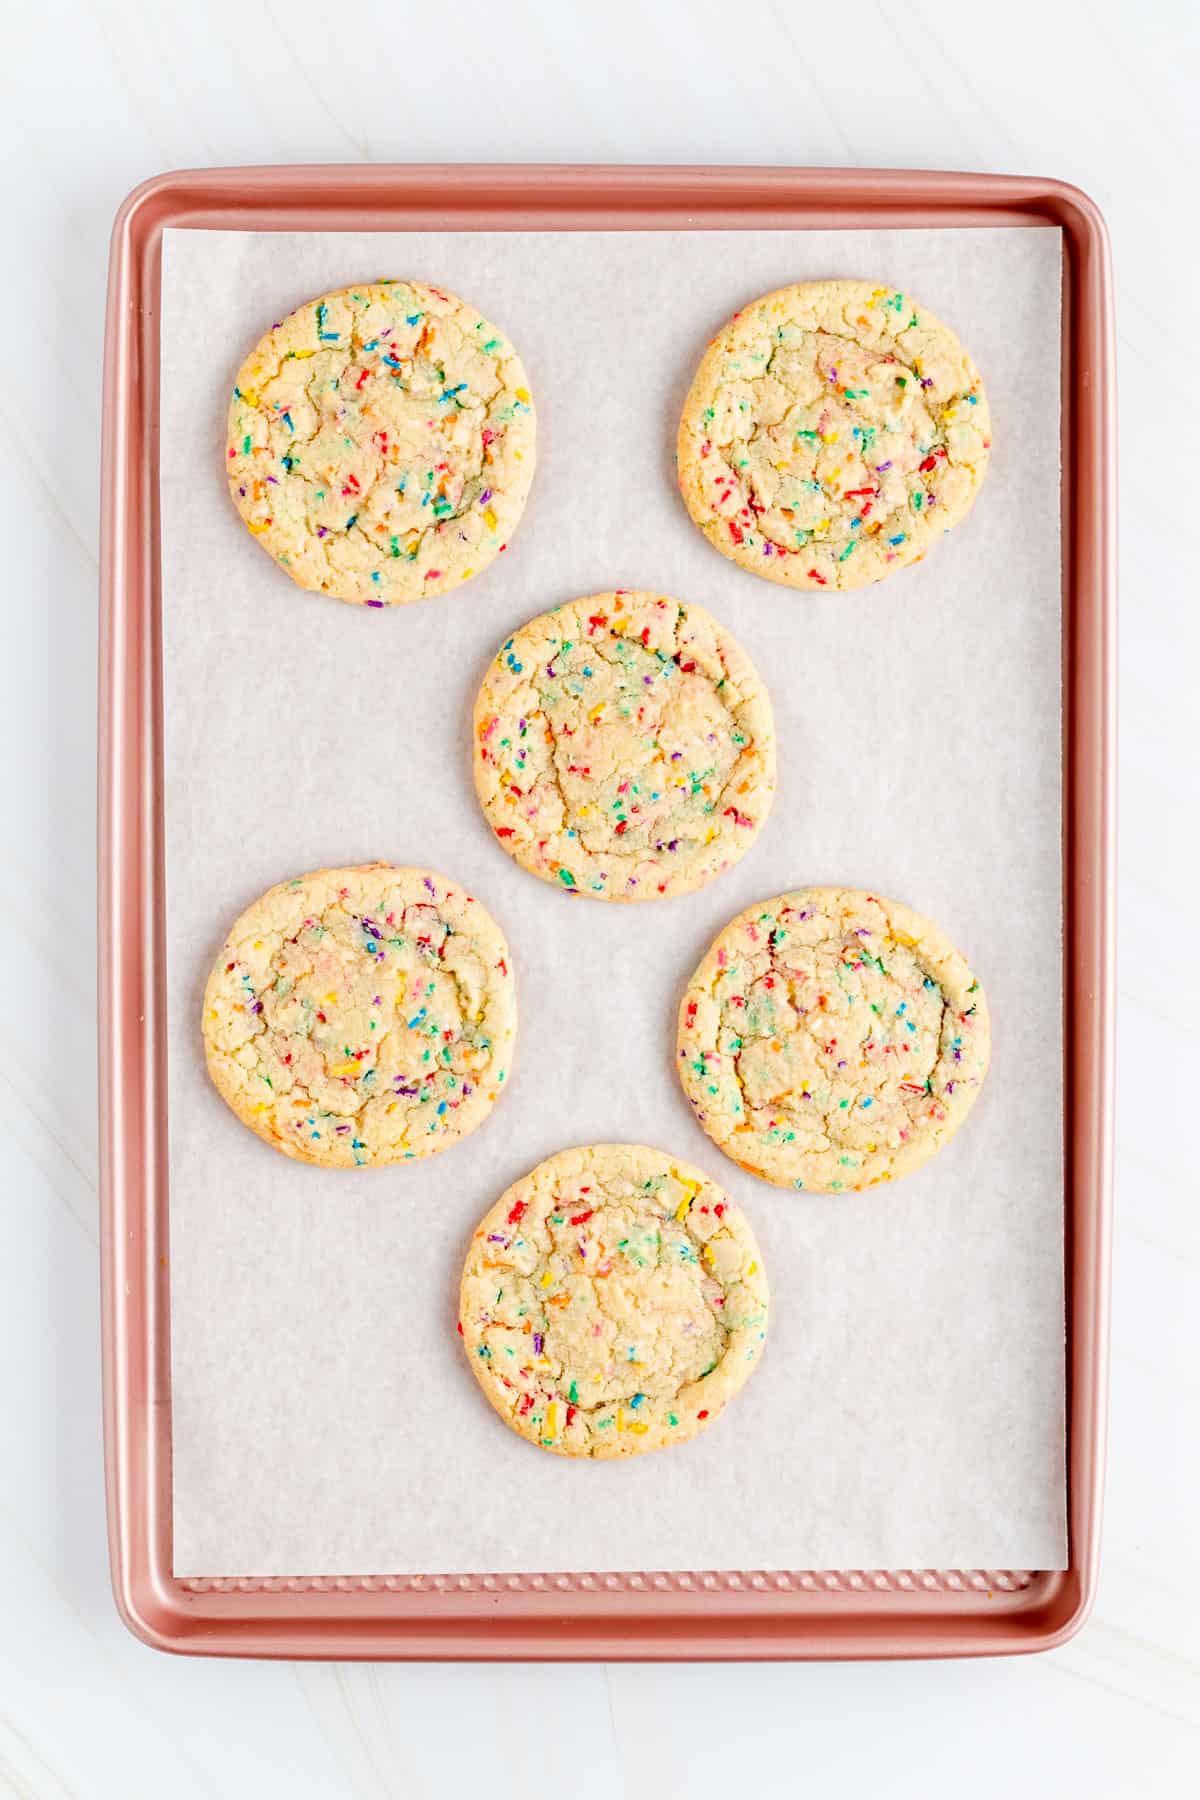 Six baked funfetti cookies dough balls on a parchment lined pink baking pan.